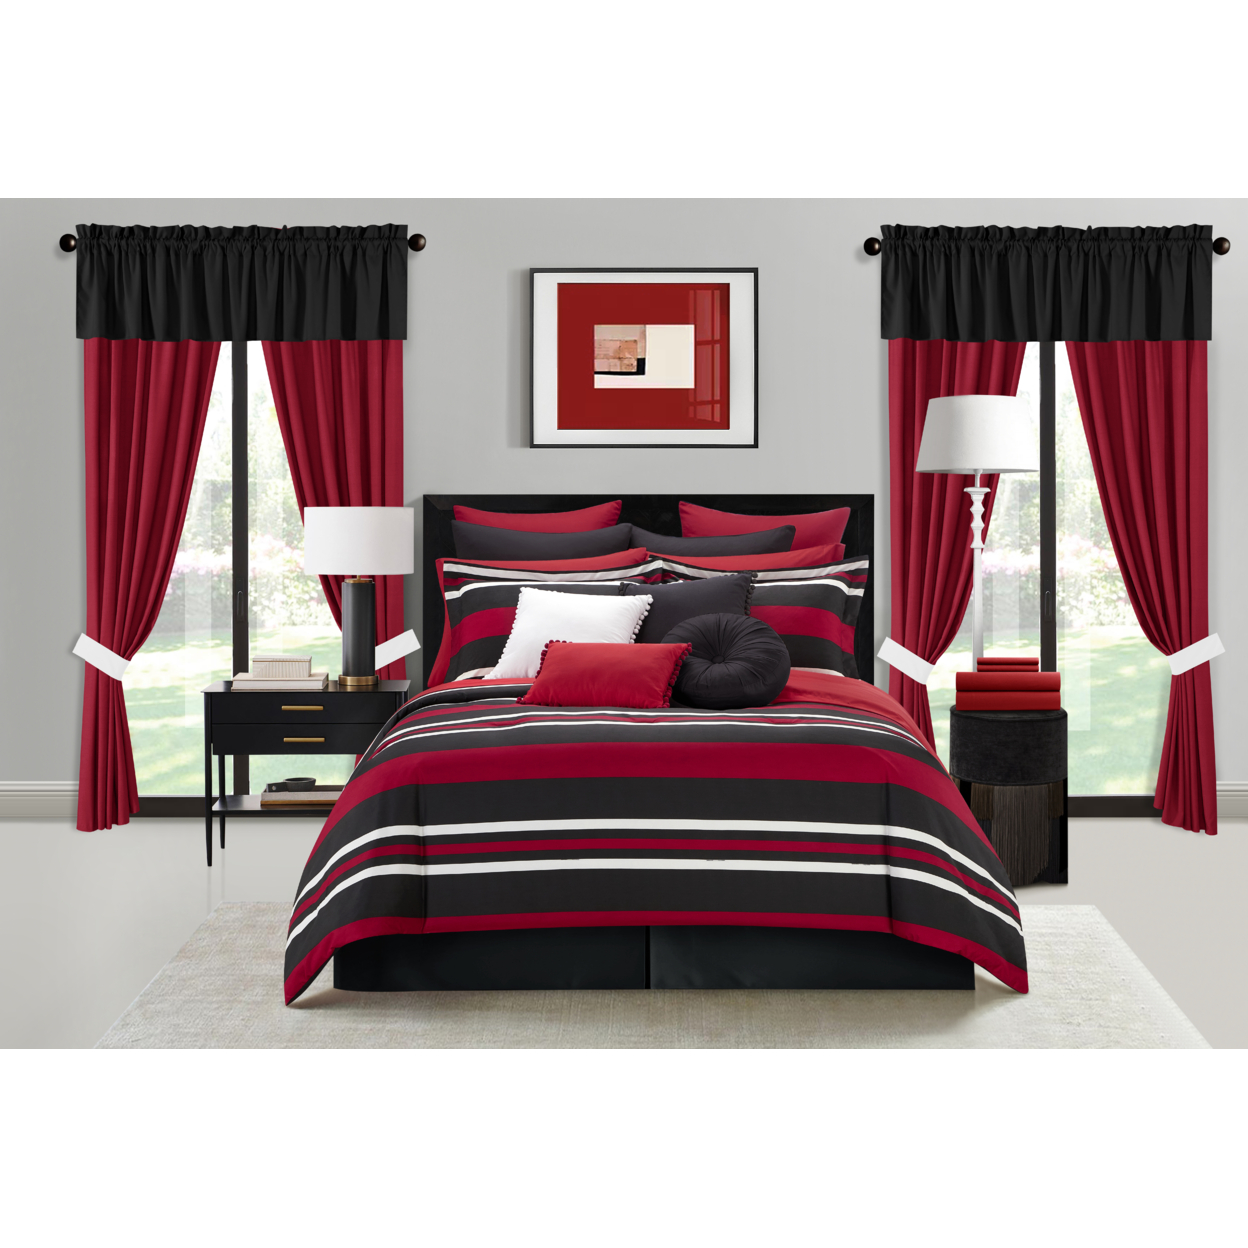 Heriberto 30 Piece Comforter Set Striped Tone On Tone Design Bed In A Bag Bedding - Red, Queen